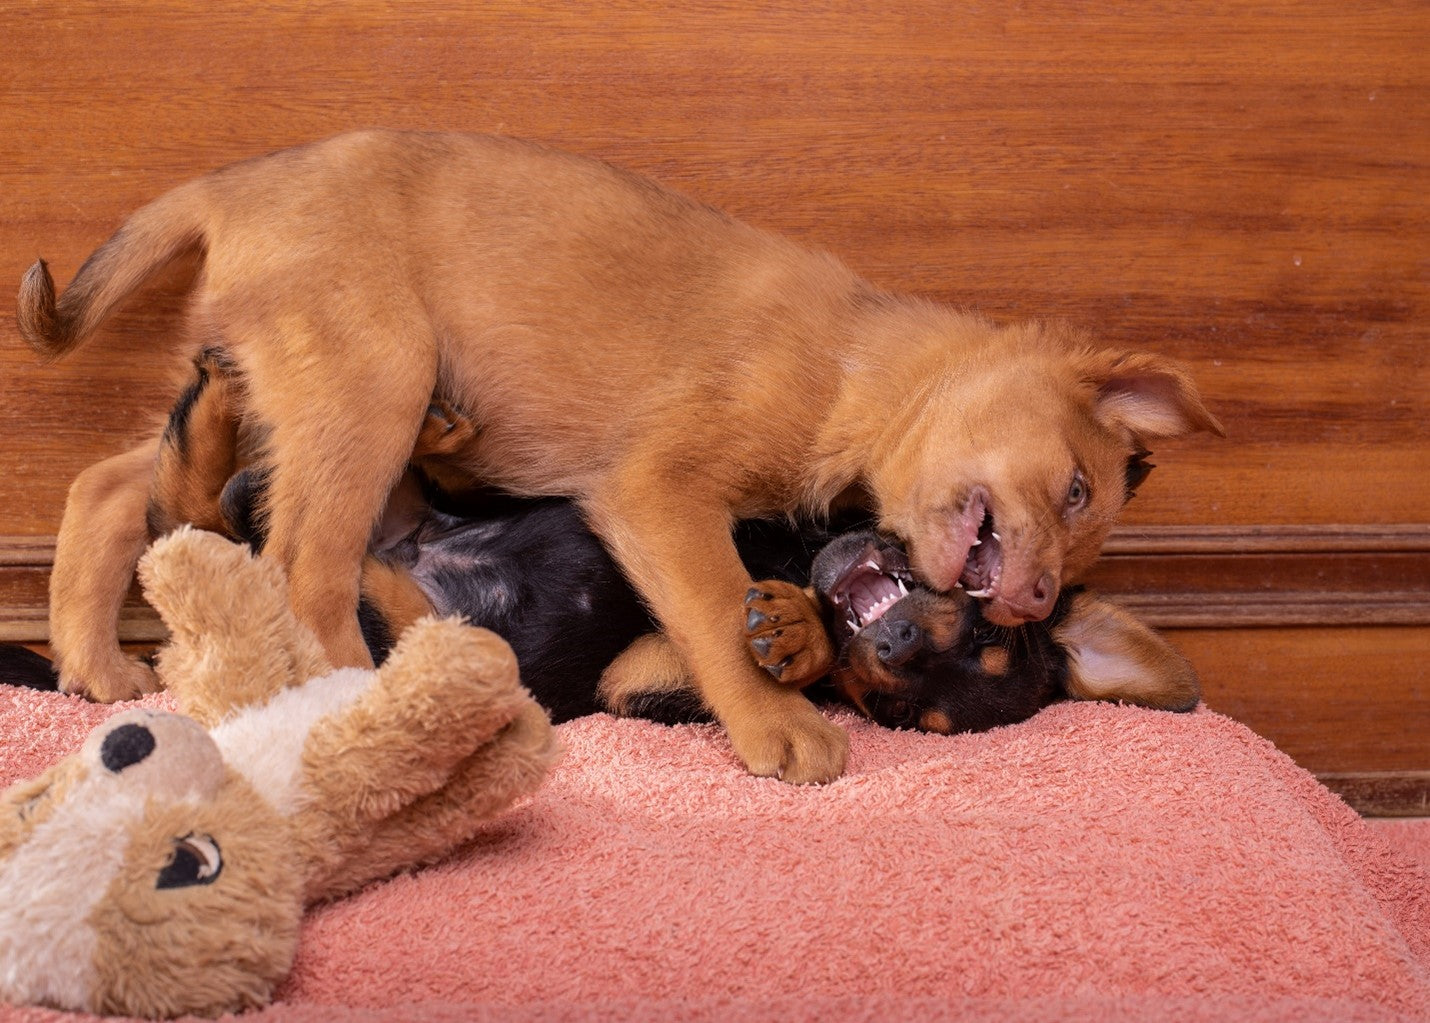 Puppies humping together with stuffed bear